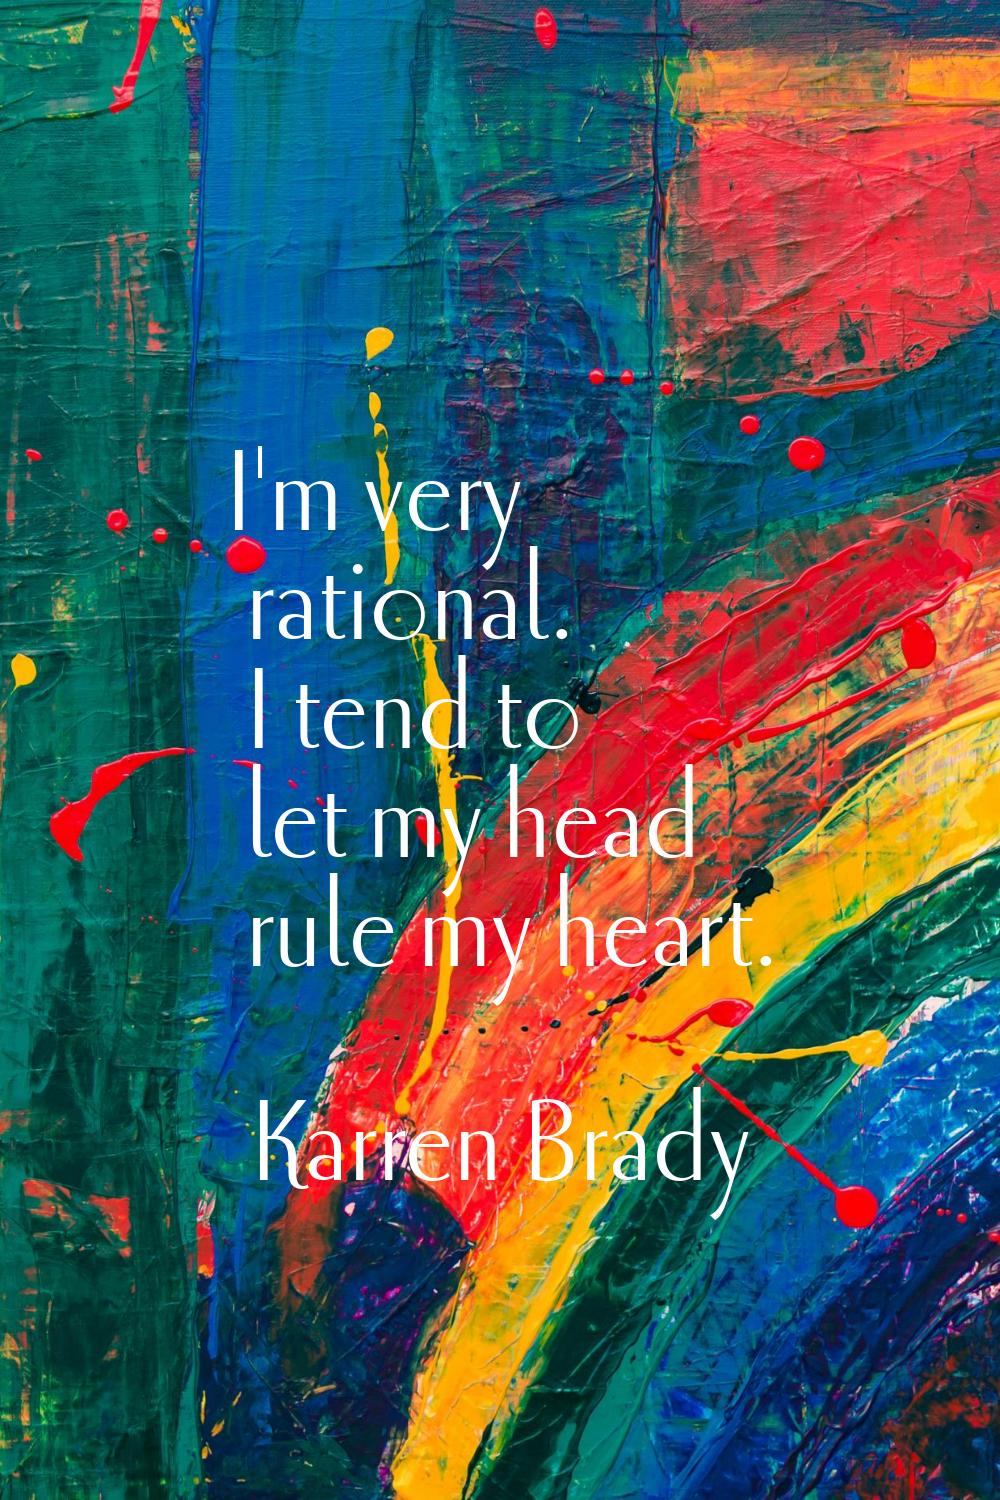 I'm very rational. I tend to let my head rule my heart.